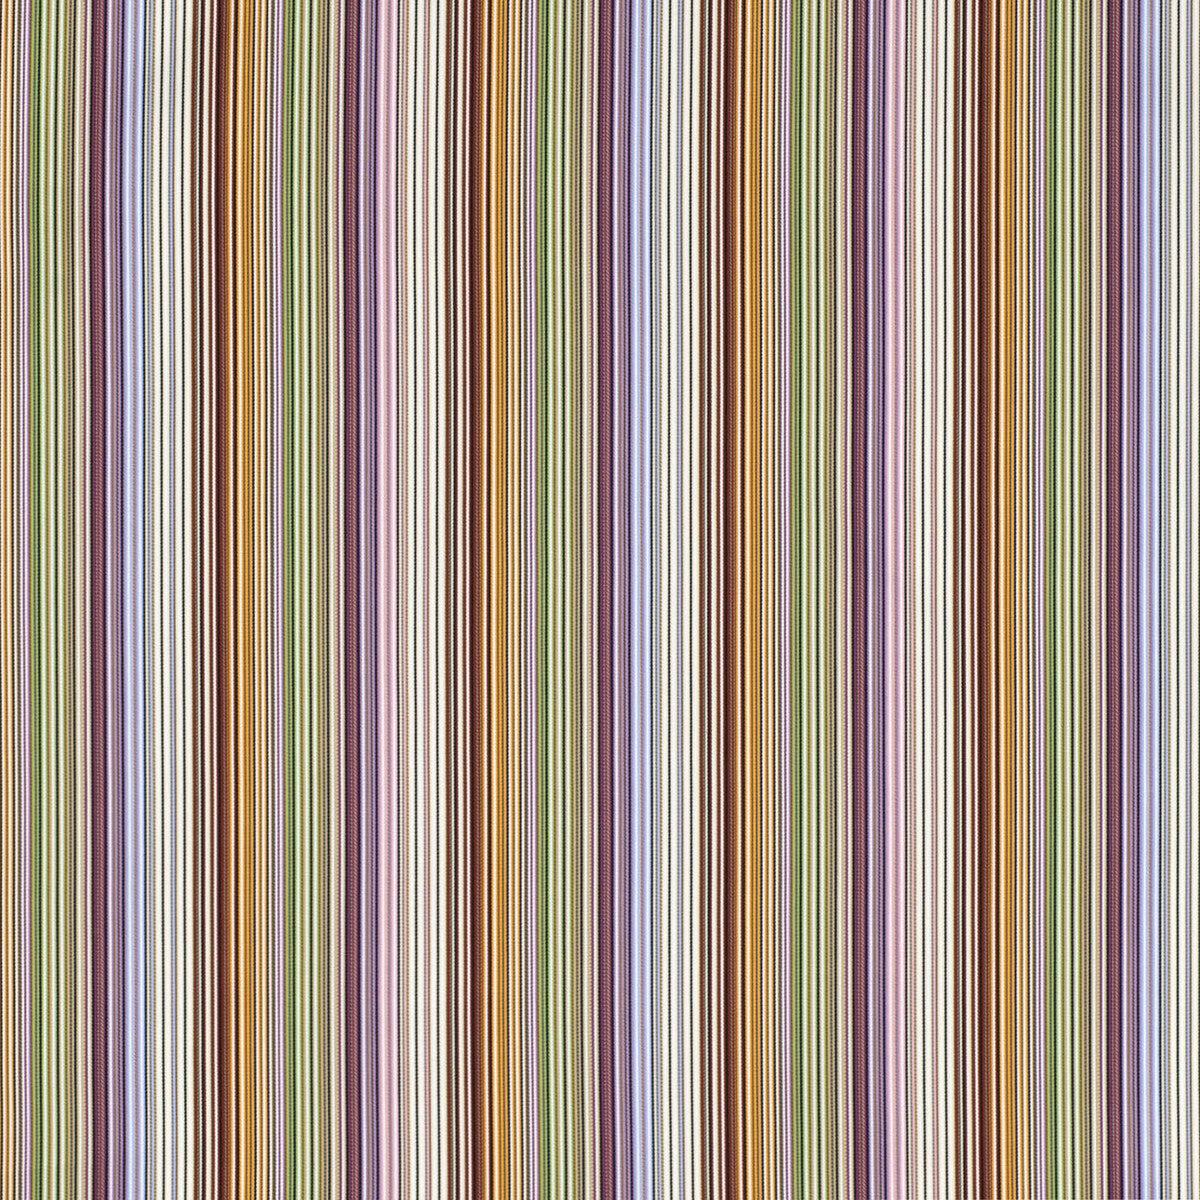 Jenkins fabric in 156 color - pattern 36163.73.0 - by Kravet Couture in the Missoni Home collection